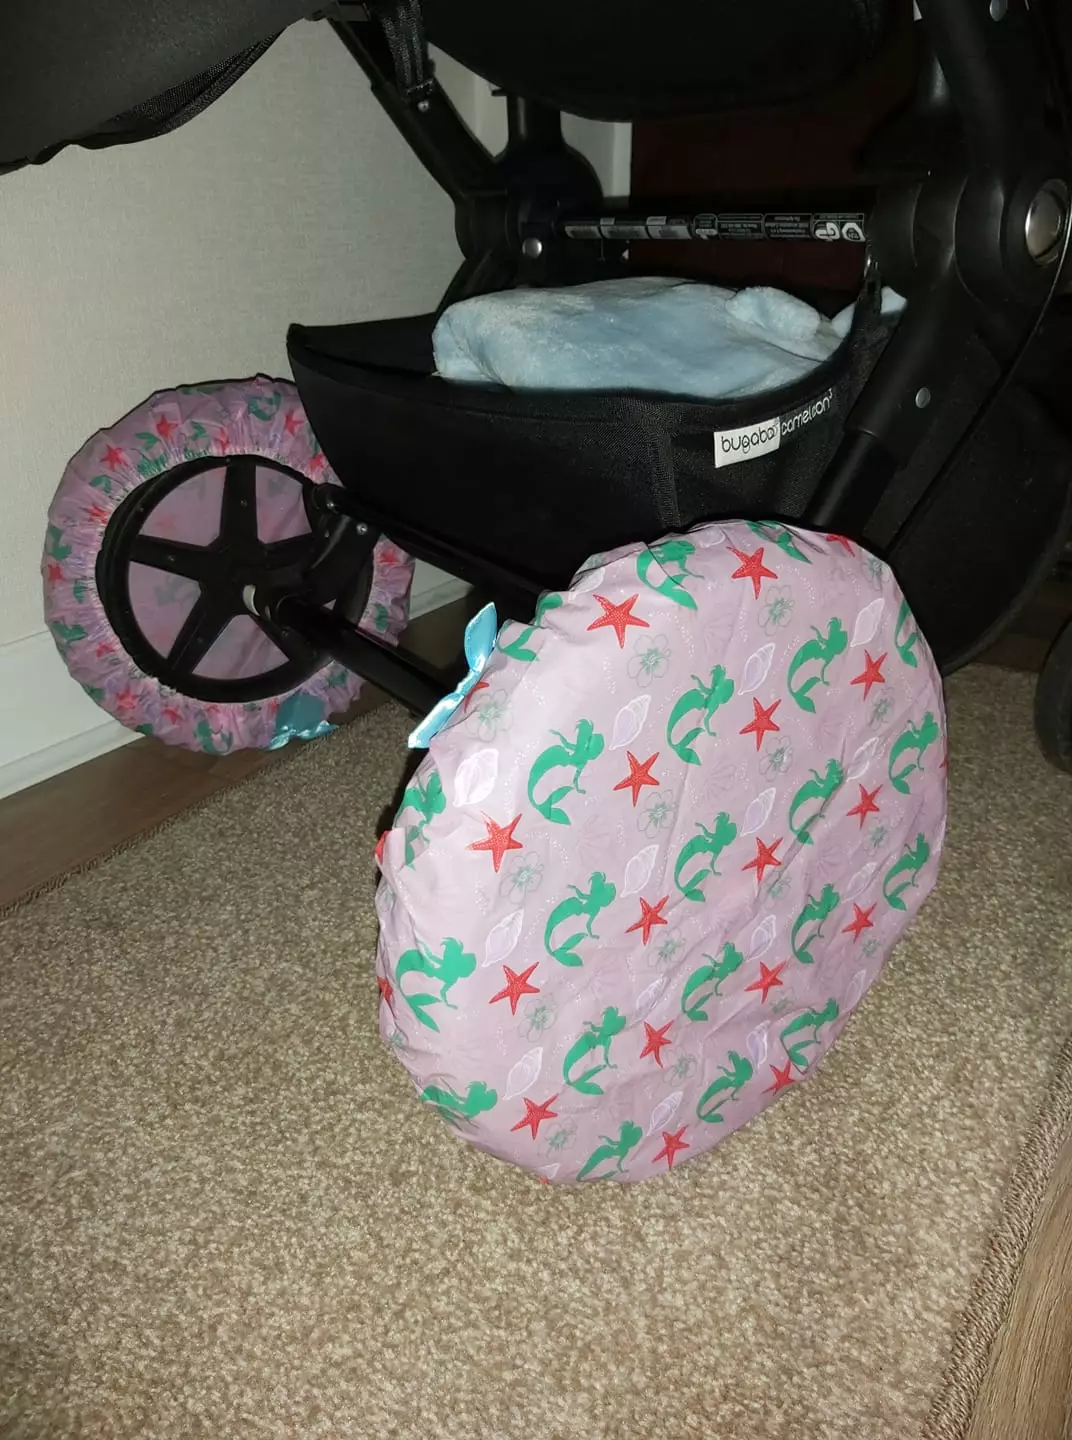 Laura added shower caps onto her pram wheels to stop mud from getting into the house (